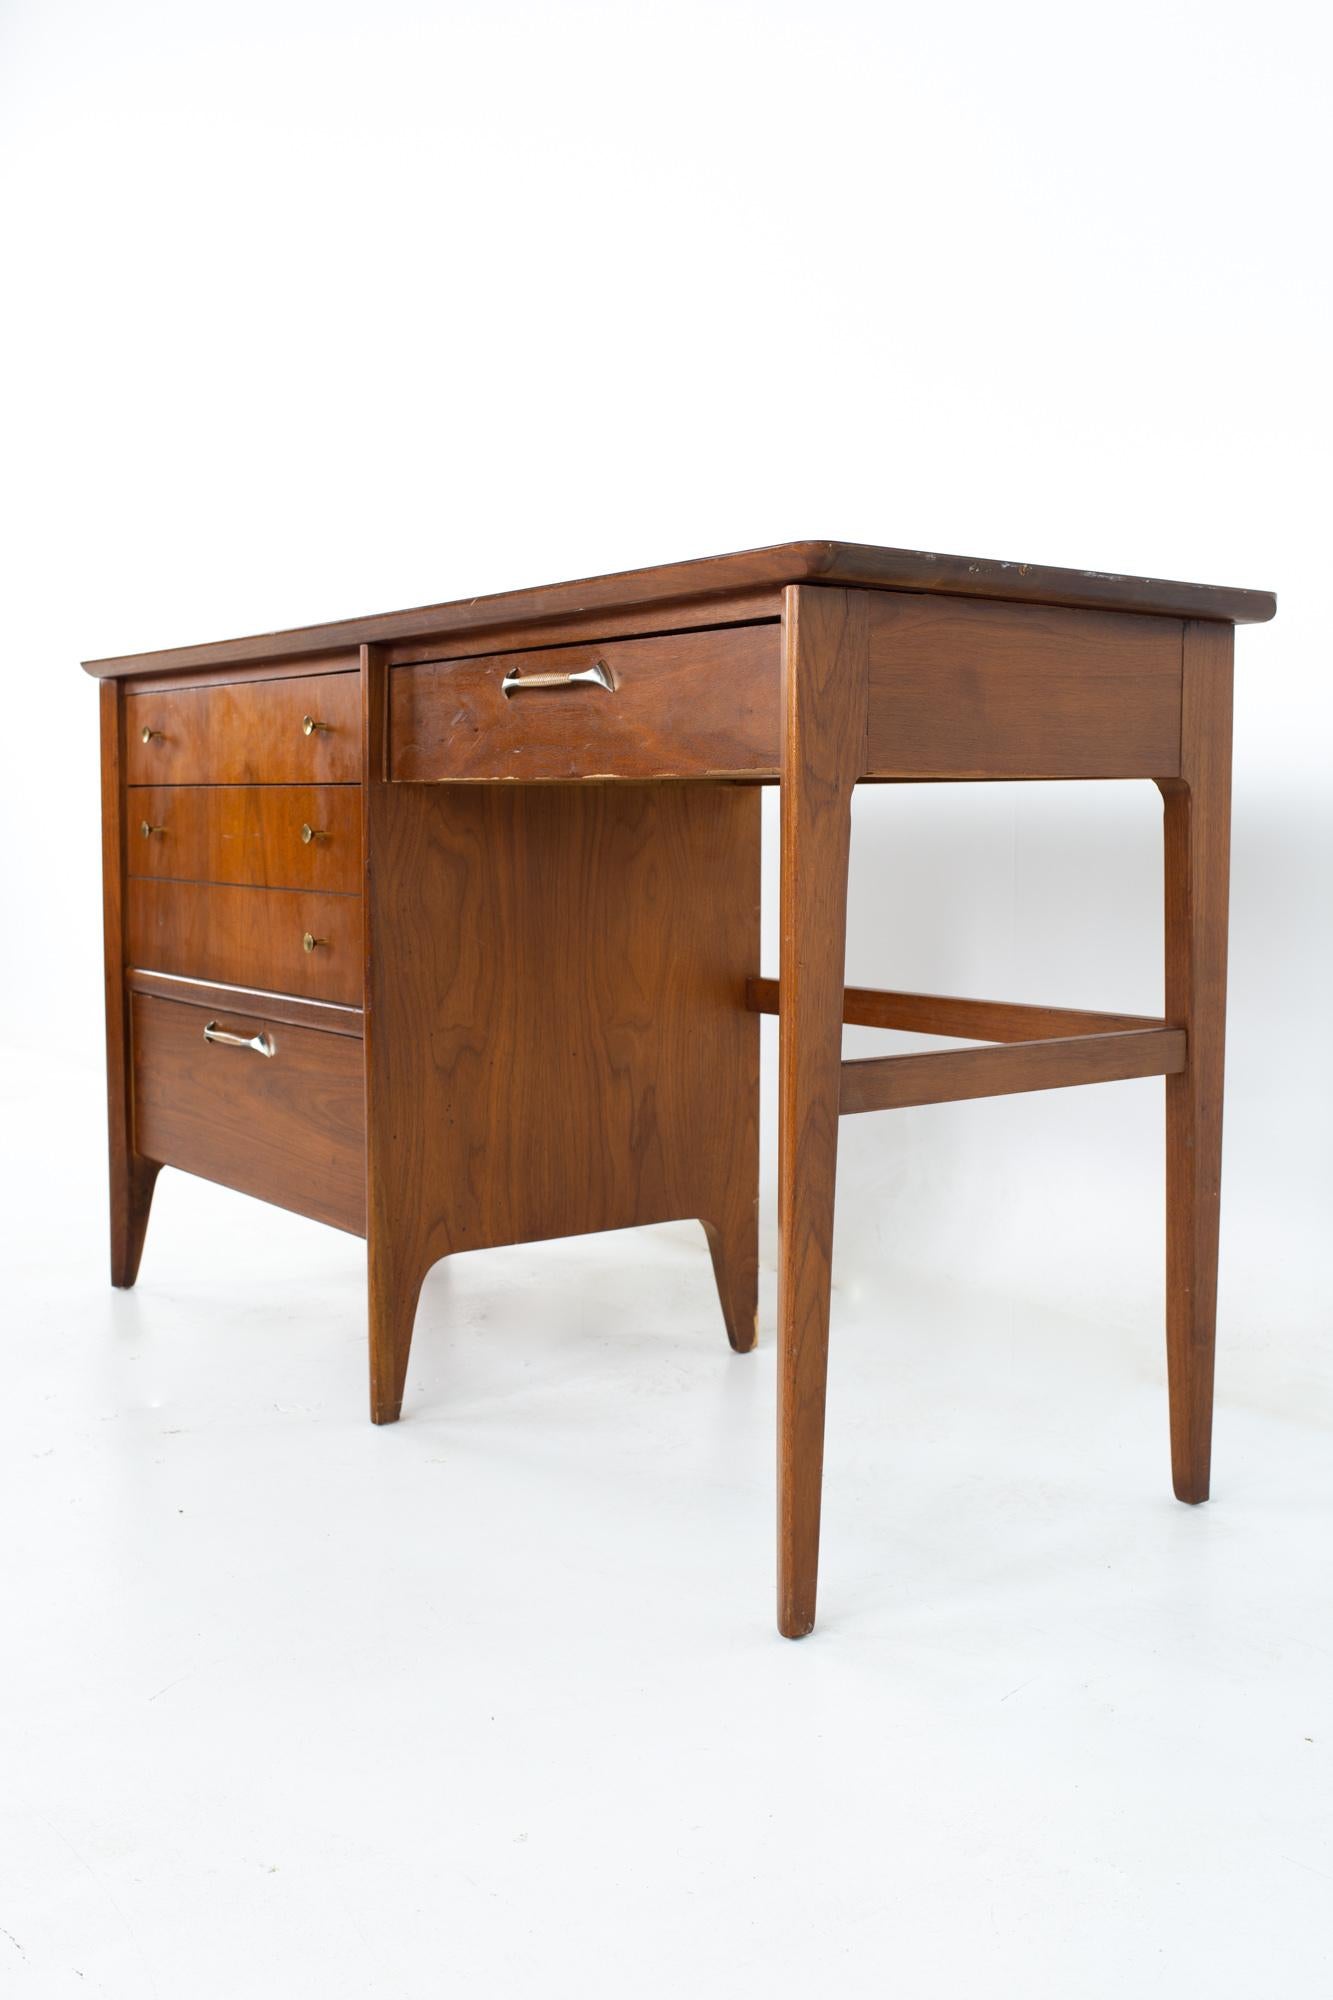 Drexel mid century walnut and Formica 4 drawer desk
Desk measures: 54 wide x 20 deep x 30 inches high 

All pieces of furniture can be had in what we call restored vintage condition. That means the piece is restored upon purchase so it’s free of